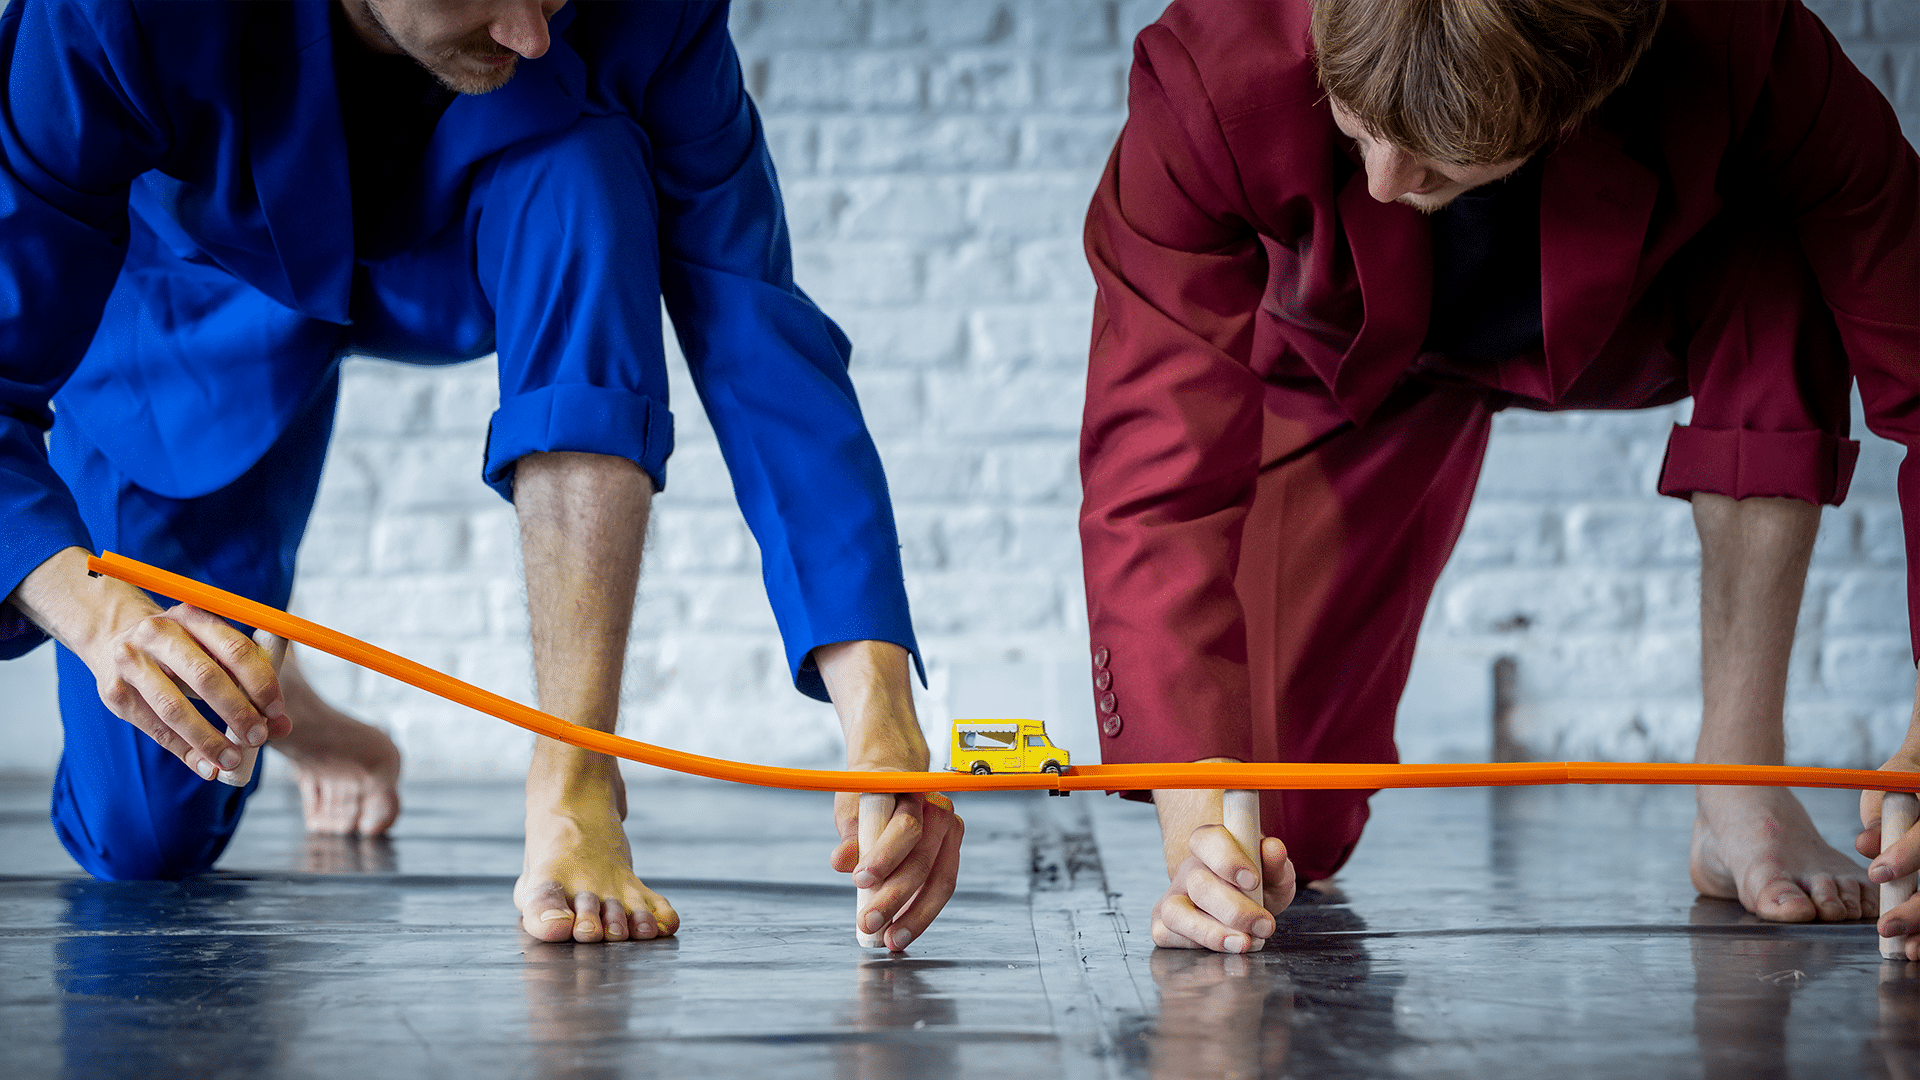 Two performers wearing red and blue suits balance a toy car track on their hands, a yellow toy bus rolls along it.